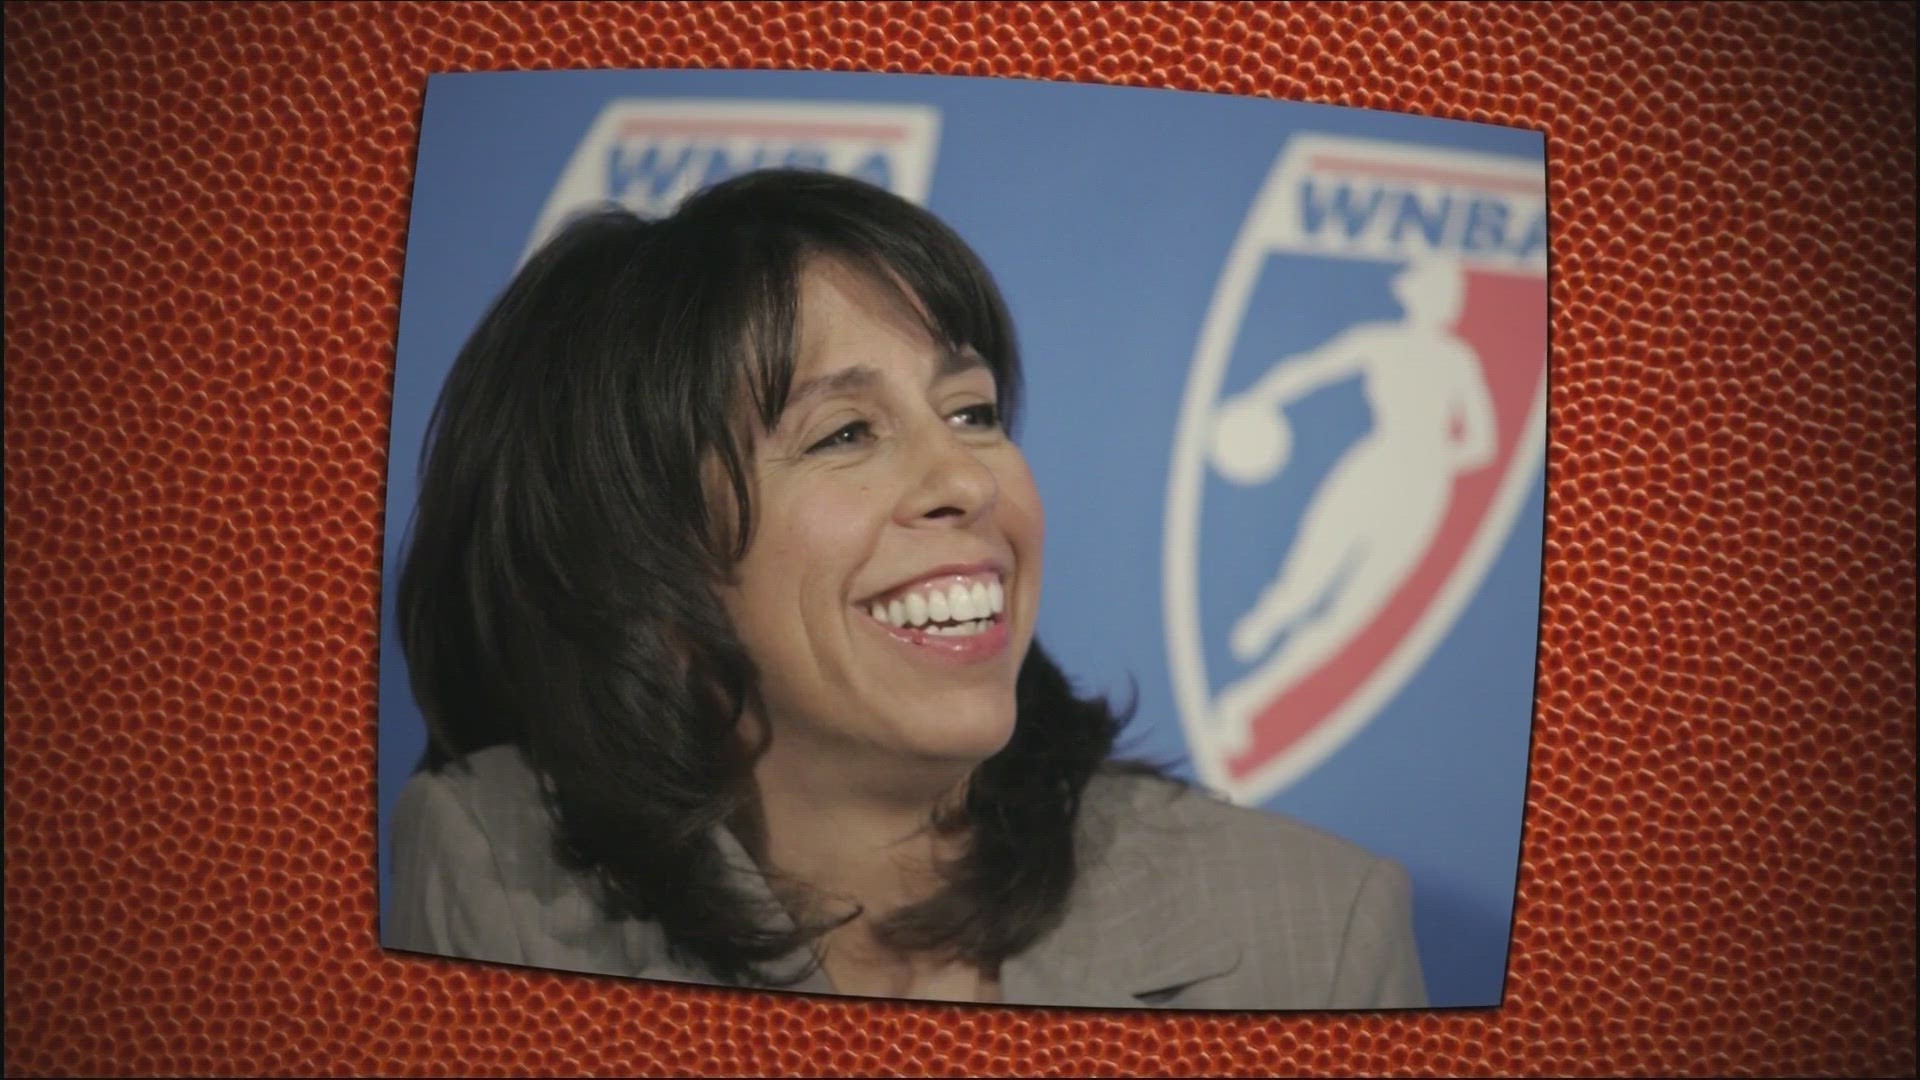 Donna Orender says failure wasn't an option when she was tasked with taking over as president of the WNBA. She's now instilling that attitude into women and girls.